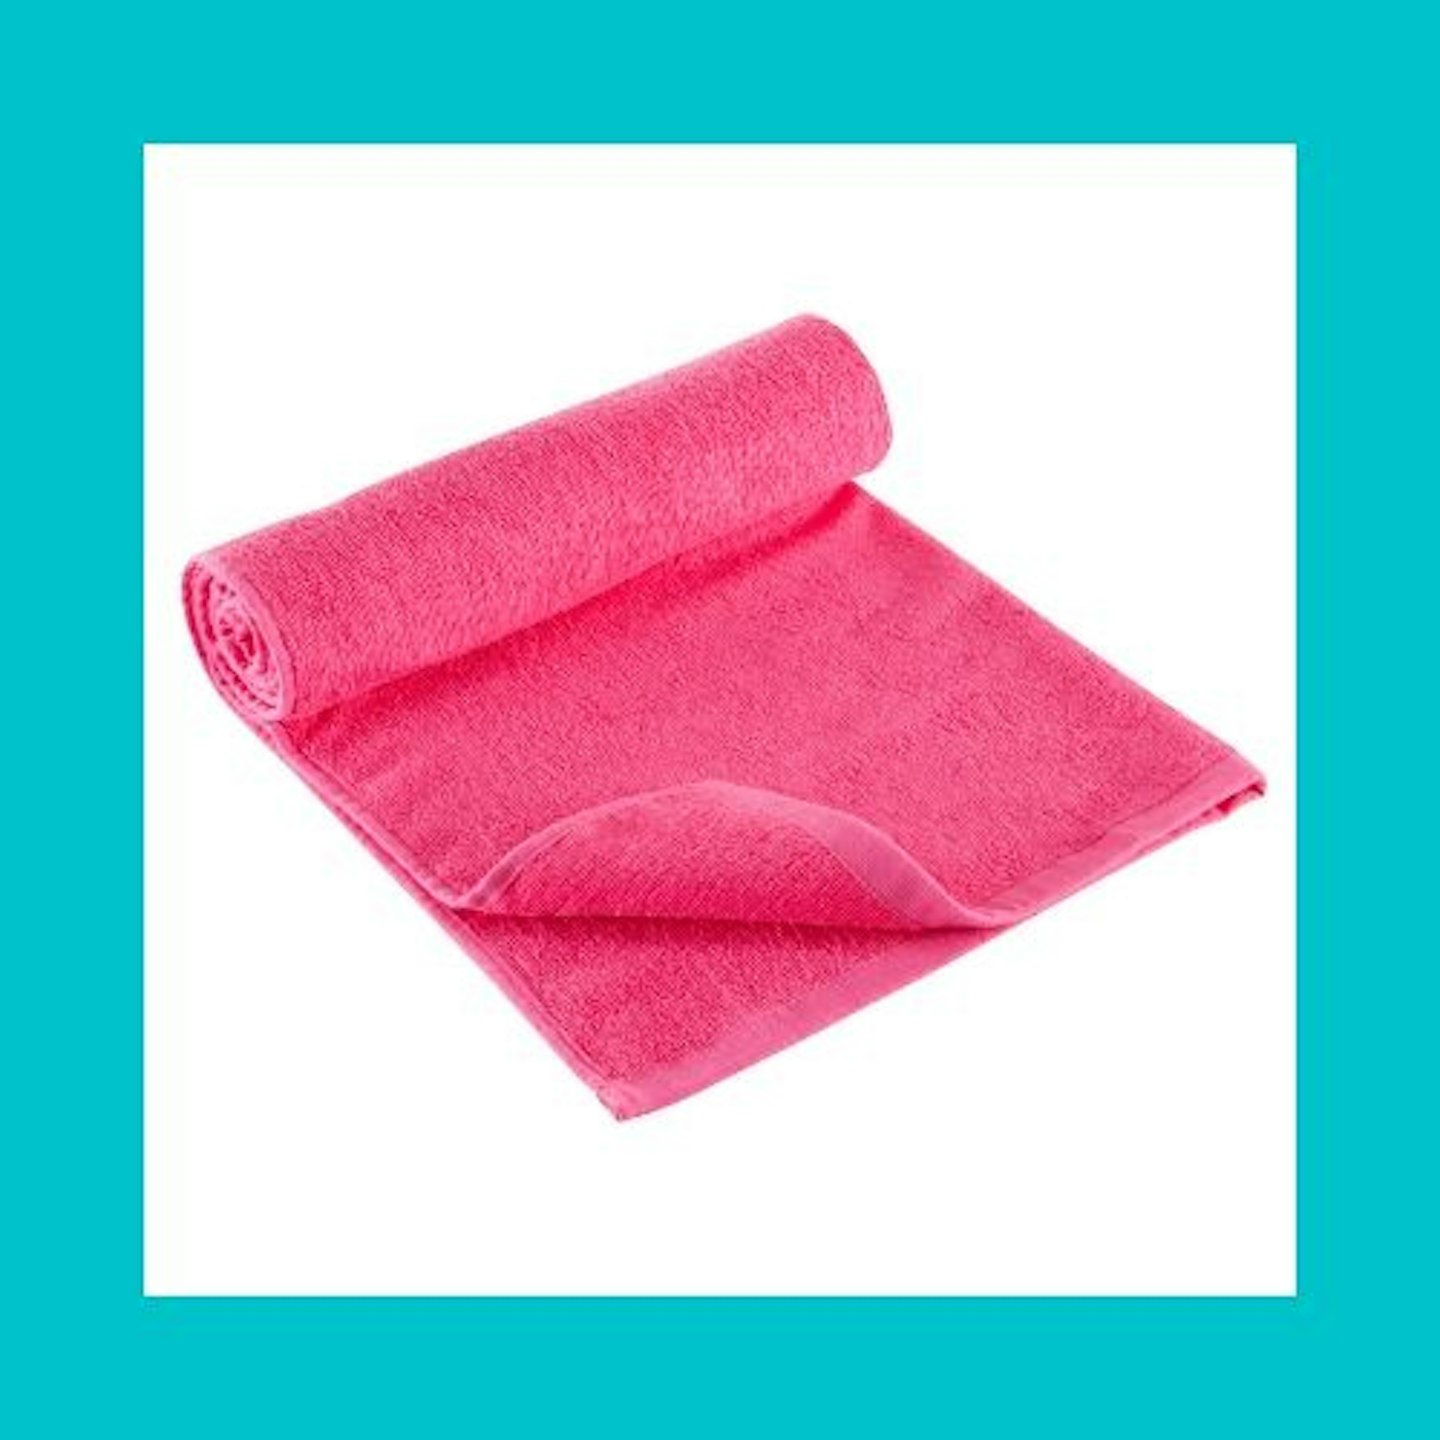 Domyos Small Cotton Fitness Towel - Pink